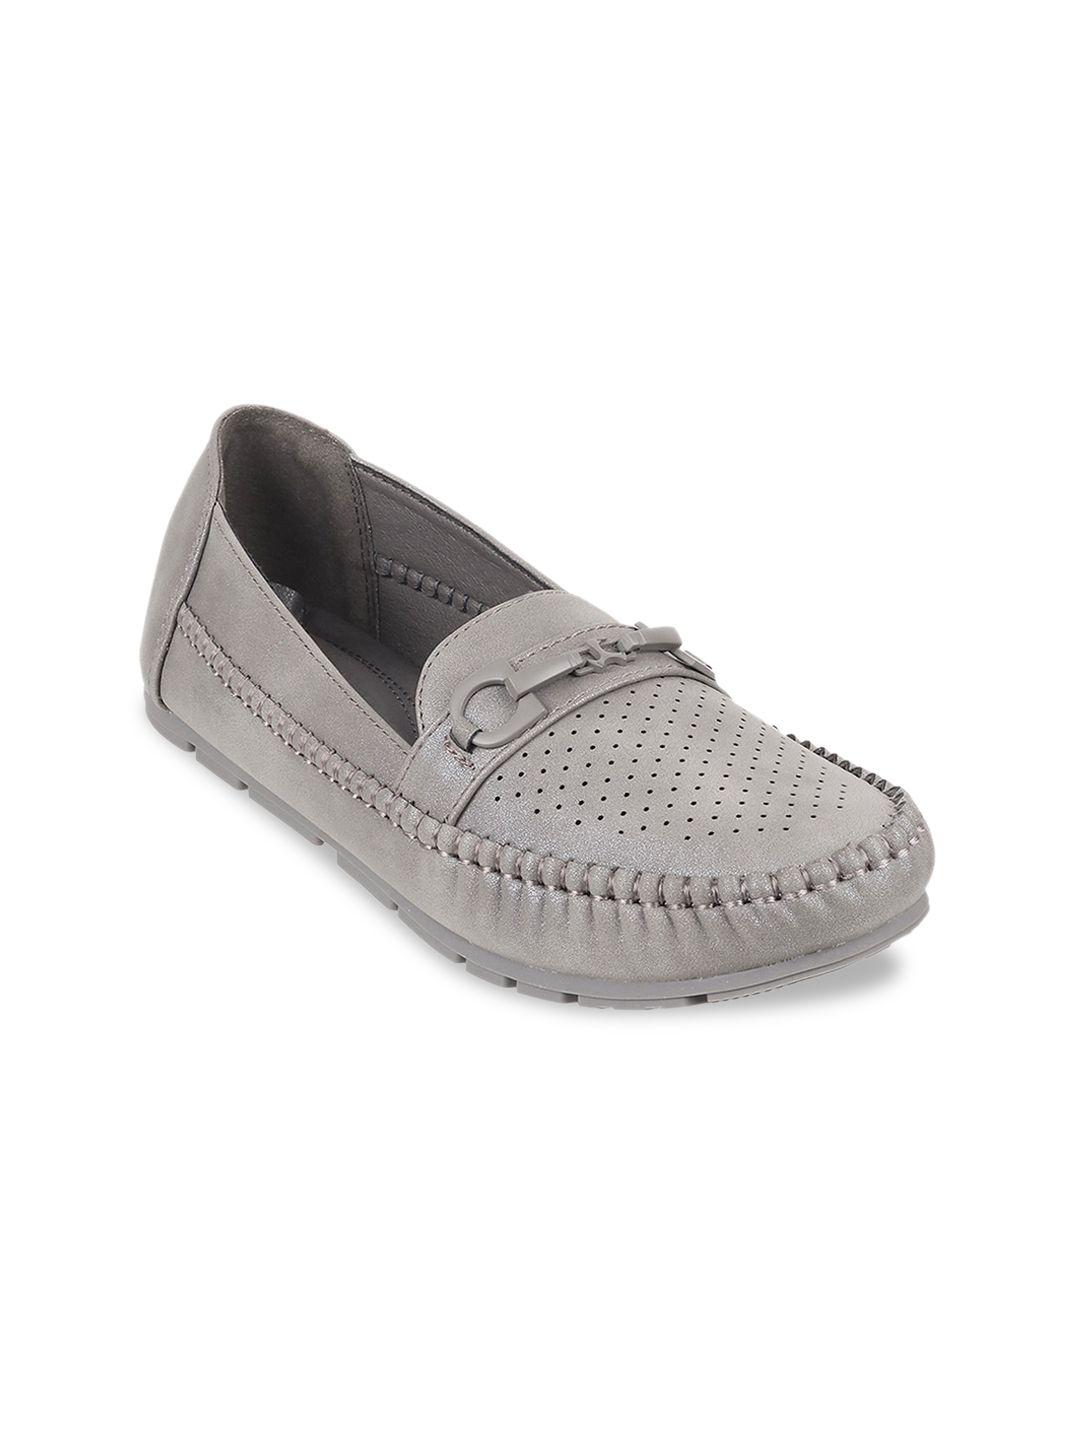 mochi-women-perforationed-loafers